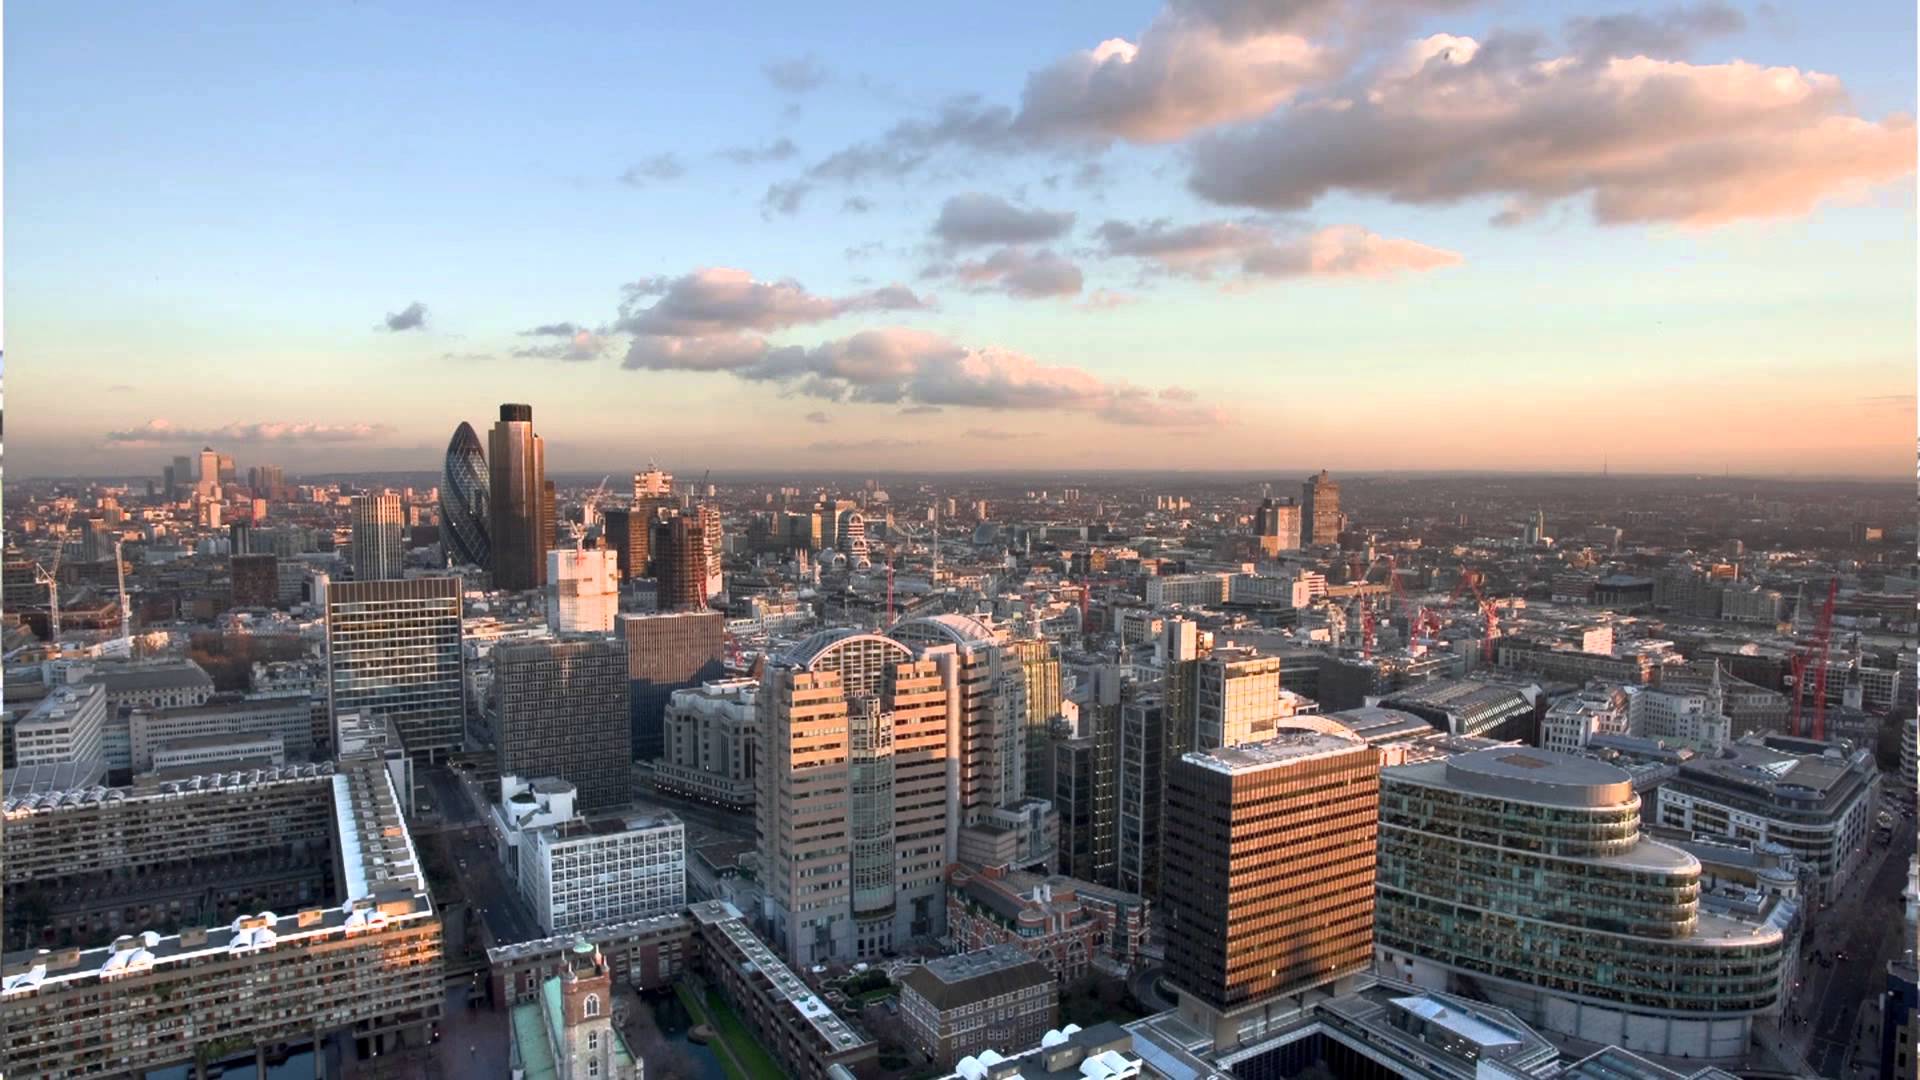 Tall buildings in the City of London - YouTube